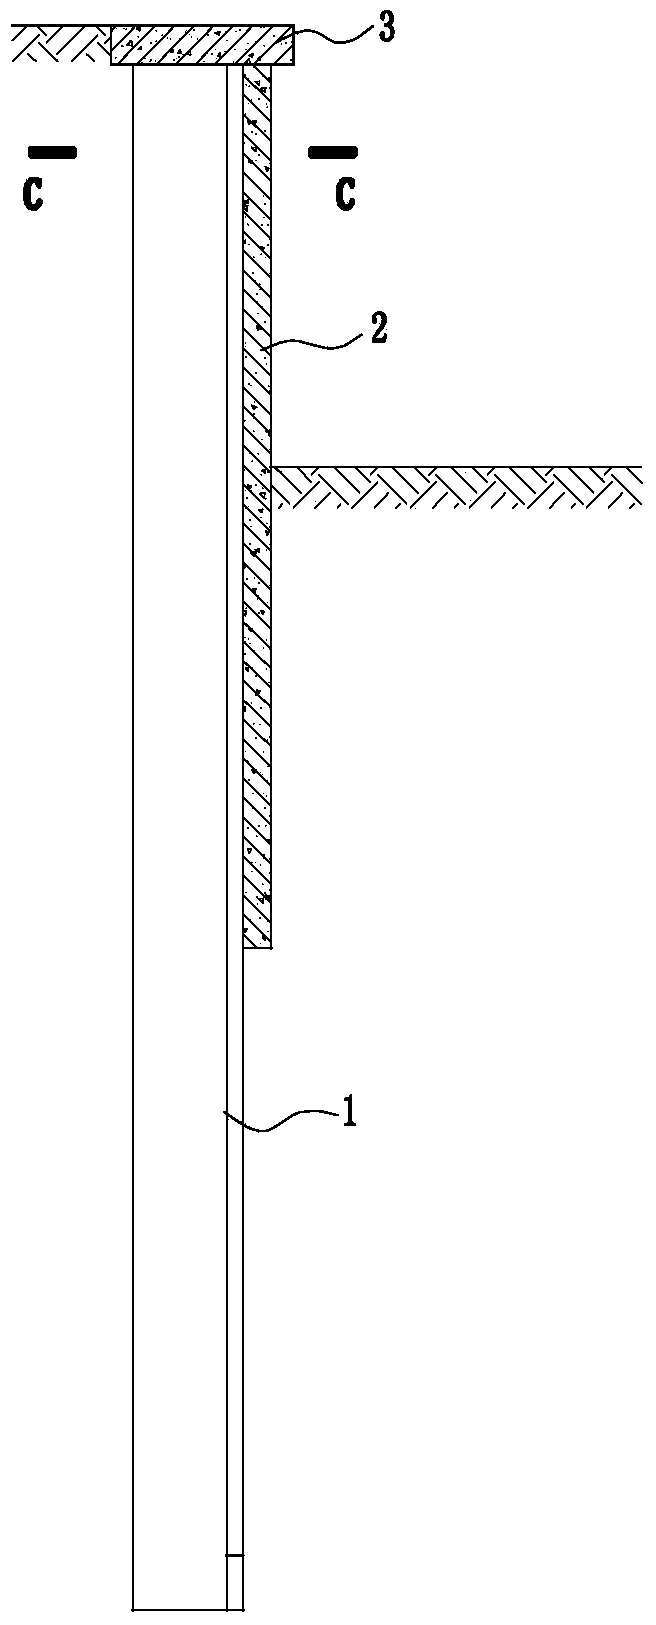 Cantilever supporting structure combining sheet pile and T-shaped thin-wall pile